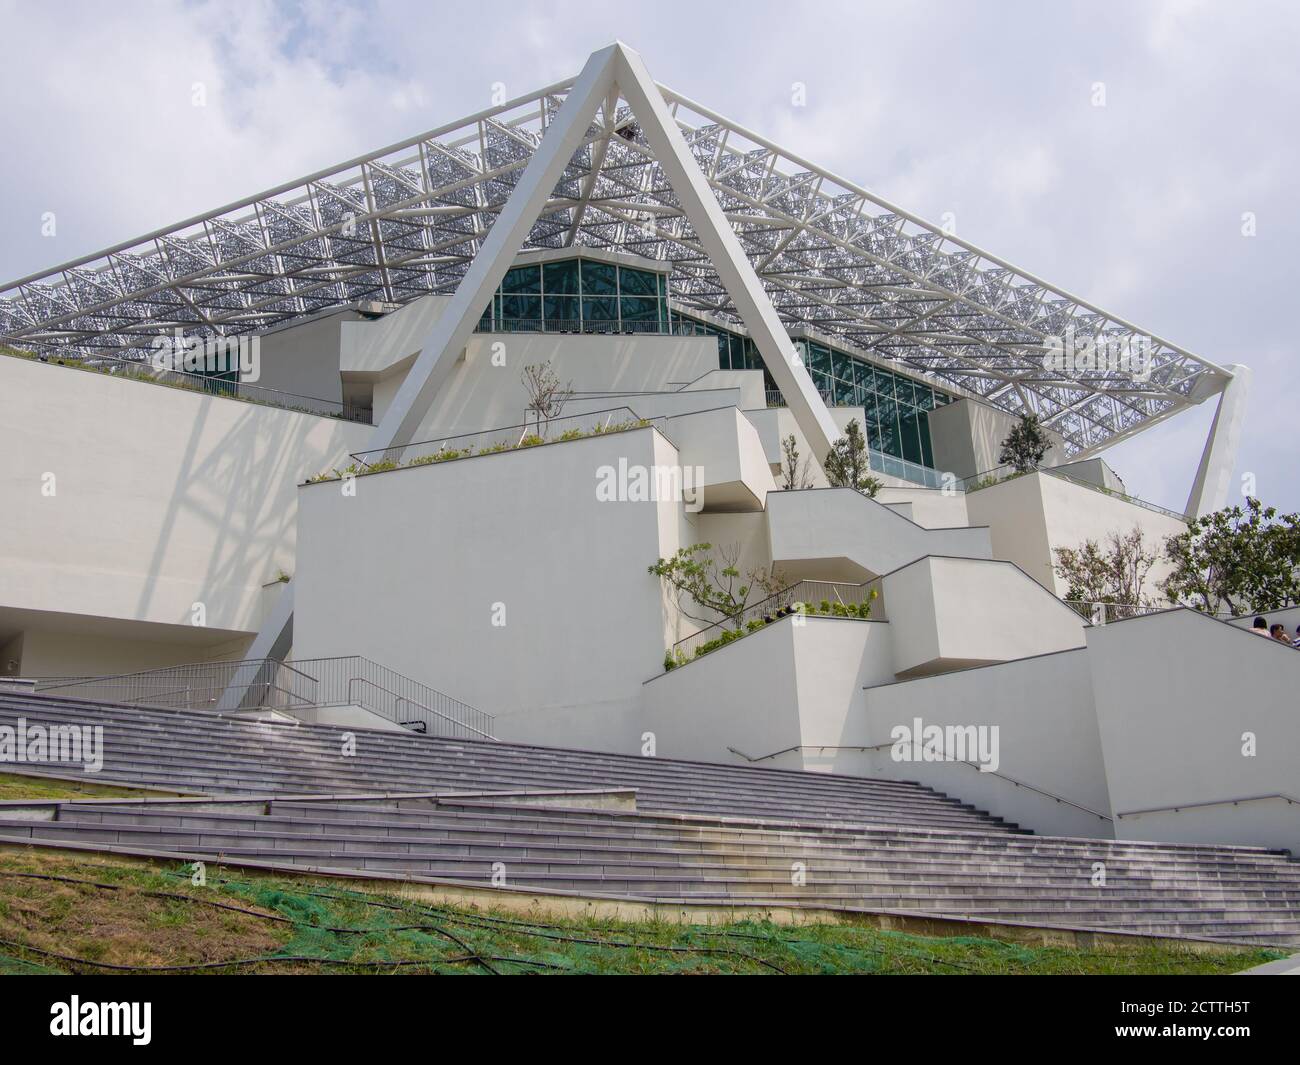 Exterior of the Tainan Art Museum Building Two on September 22, 2020 in Tainan. This building was designed by Shi Zhao Yong and Pritzker Prize winner Stock Photo